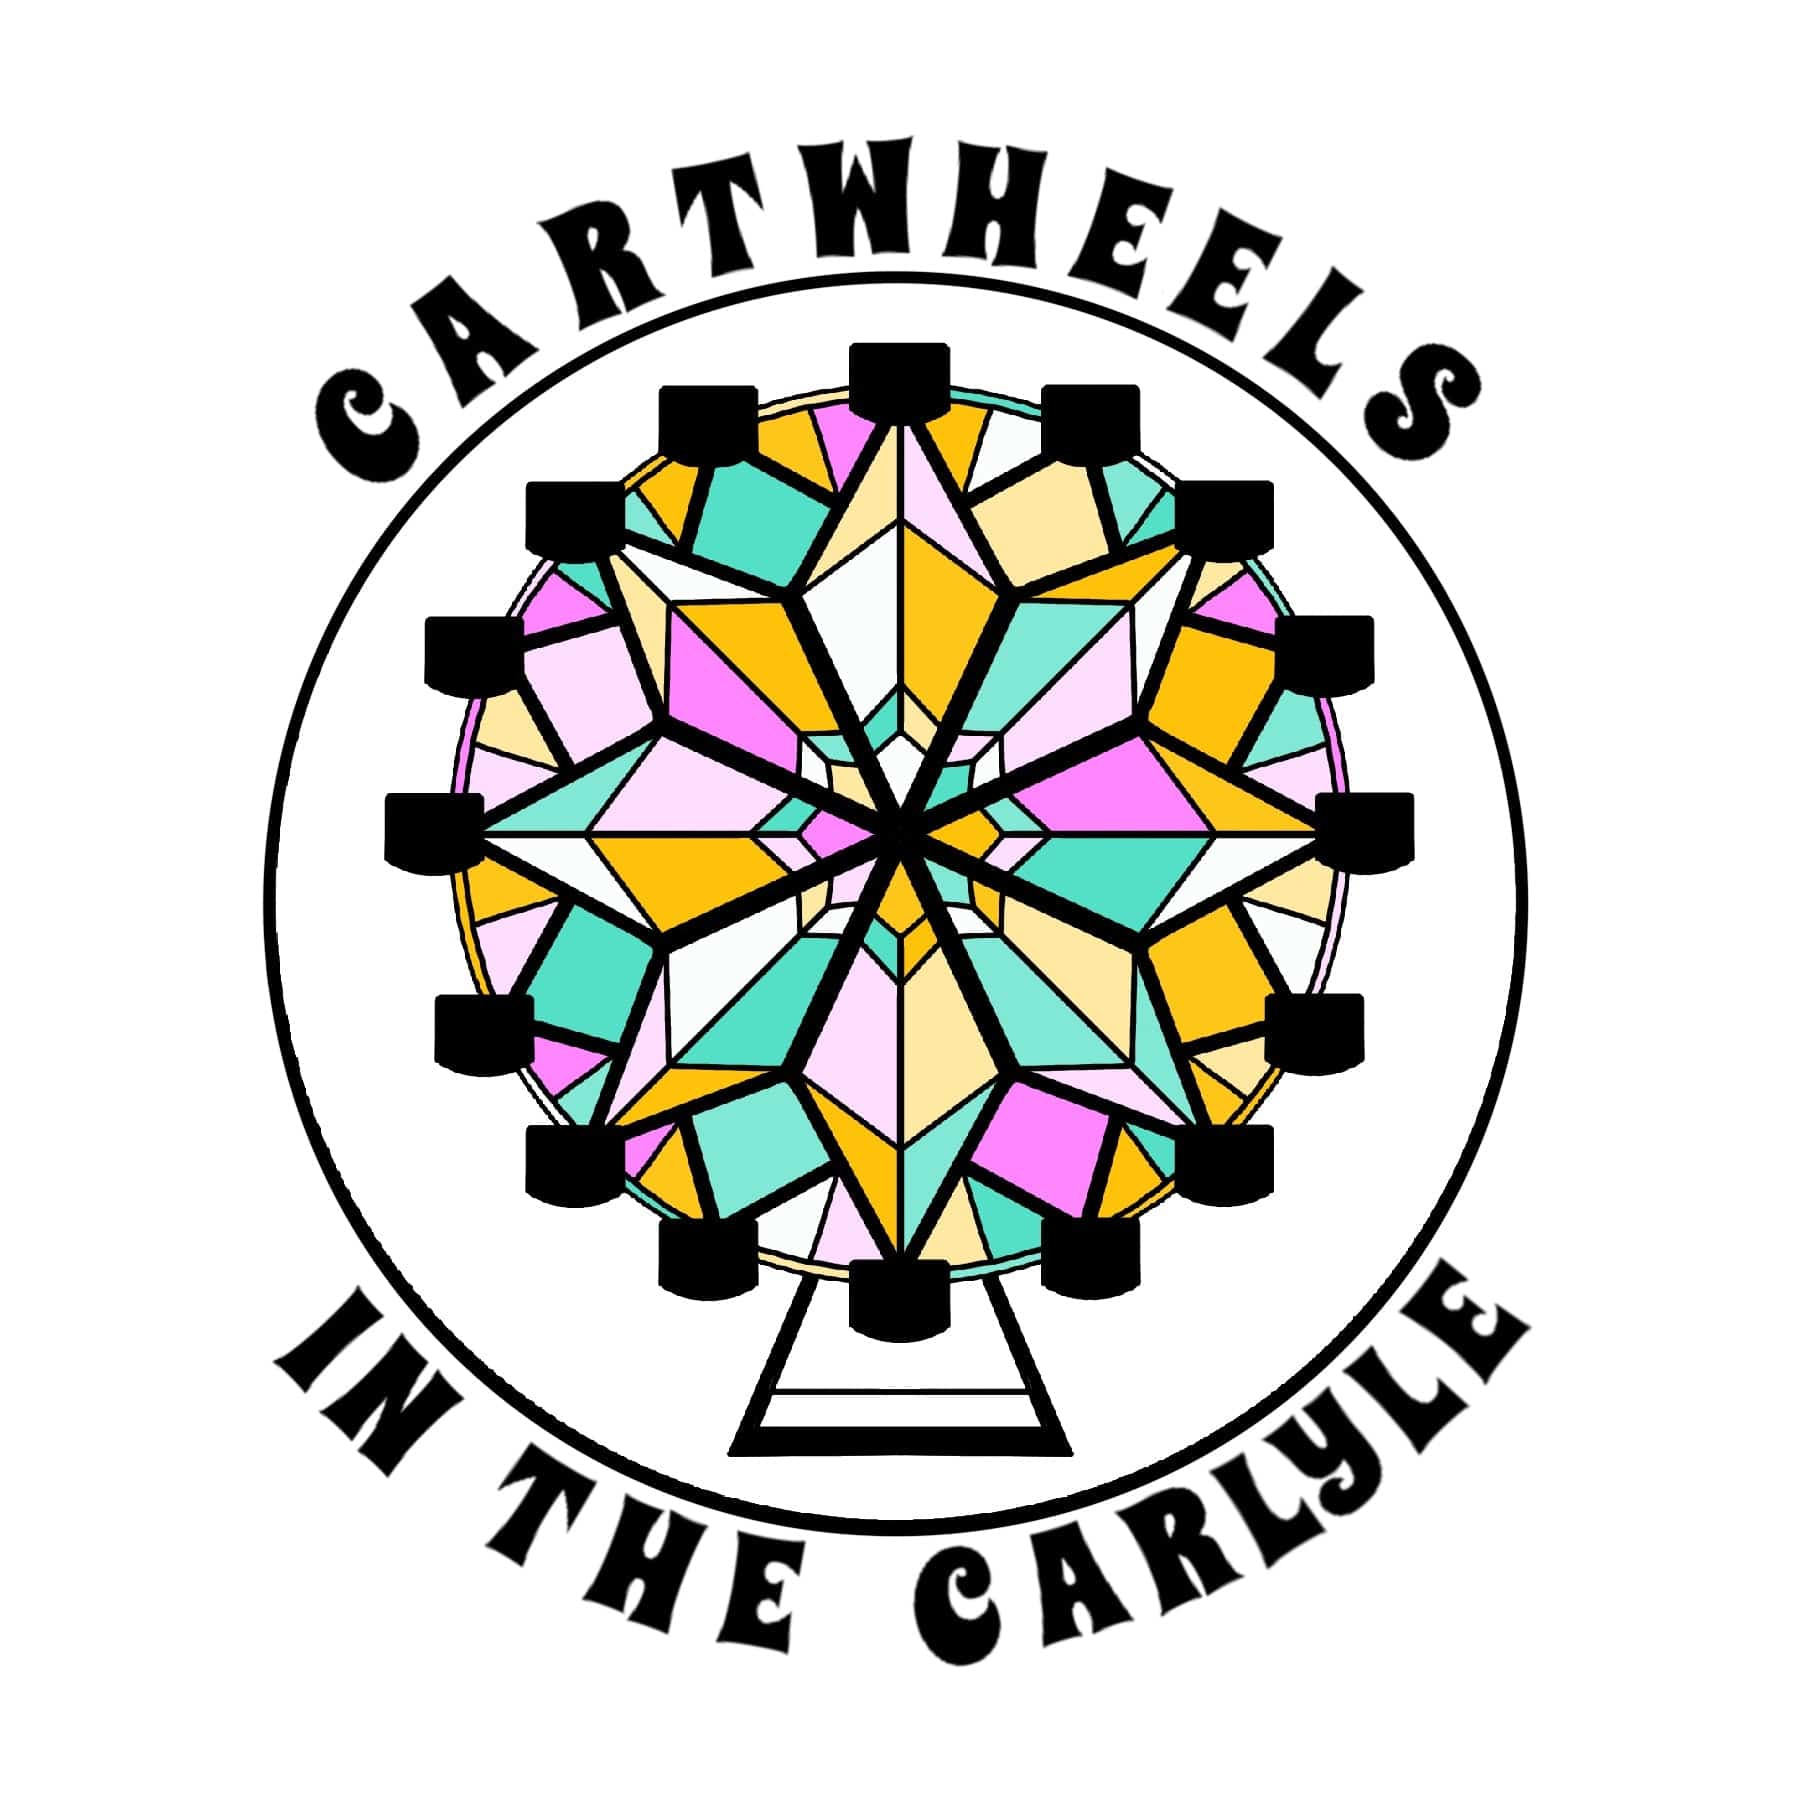 Cartwheels in the Carlyle Band Logo | DevKrea - Deviantkreations